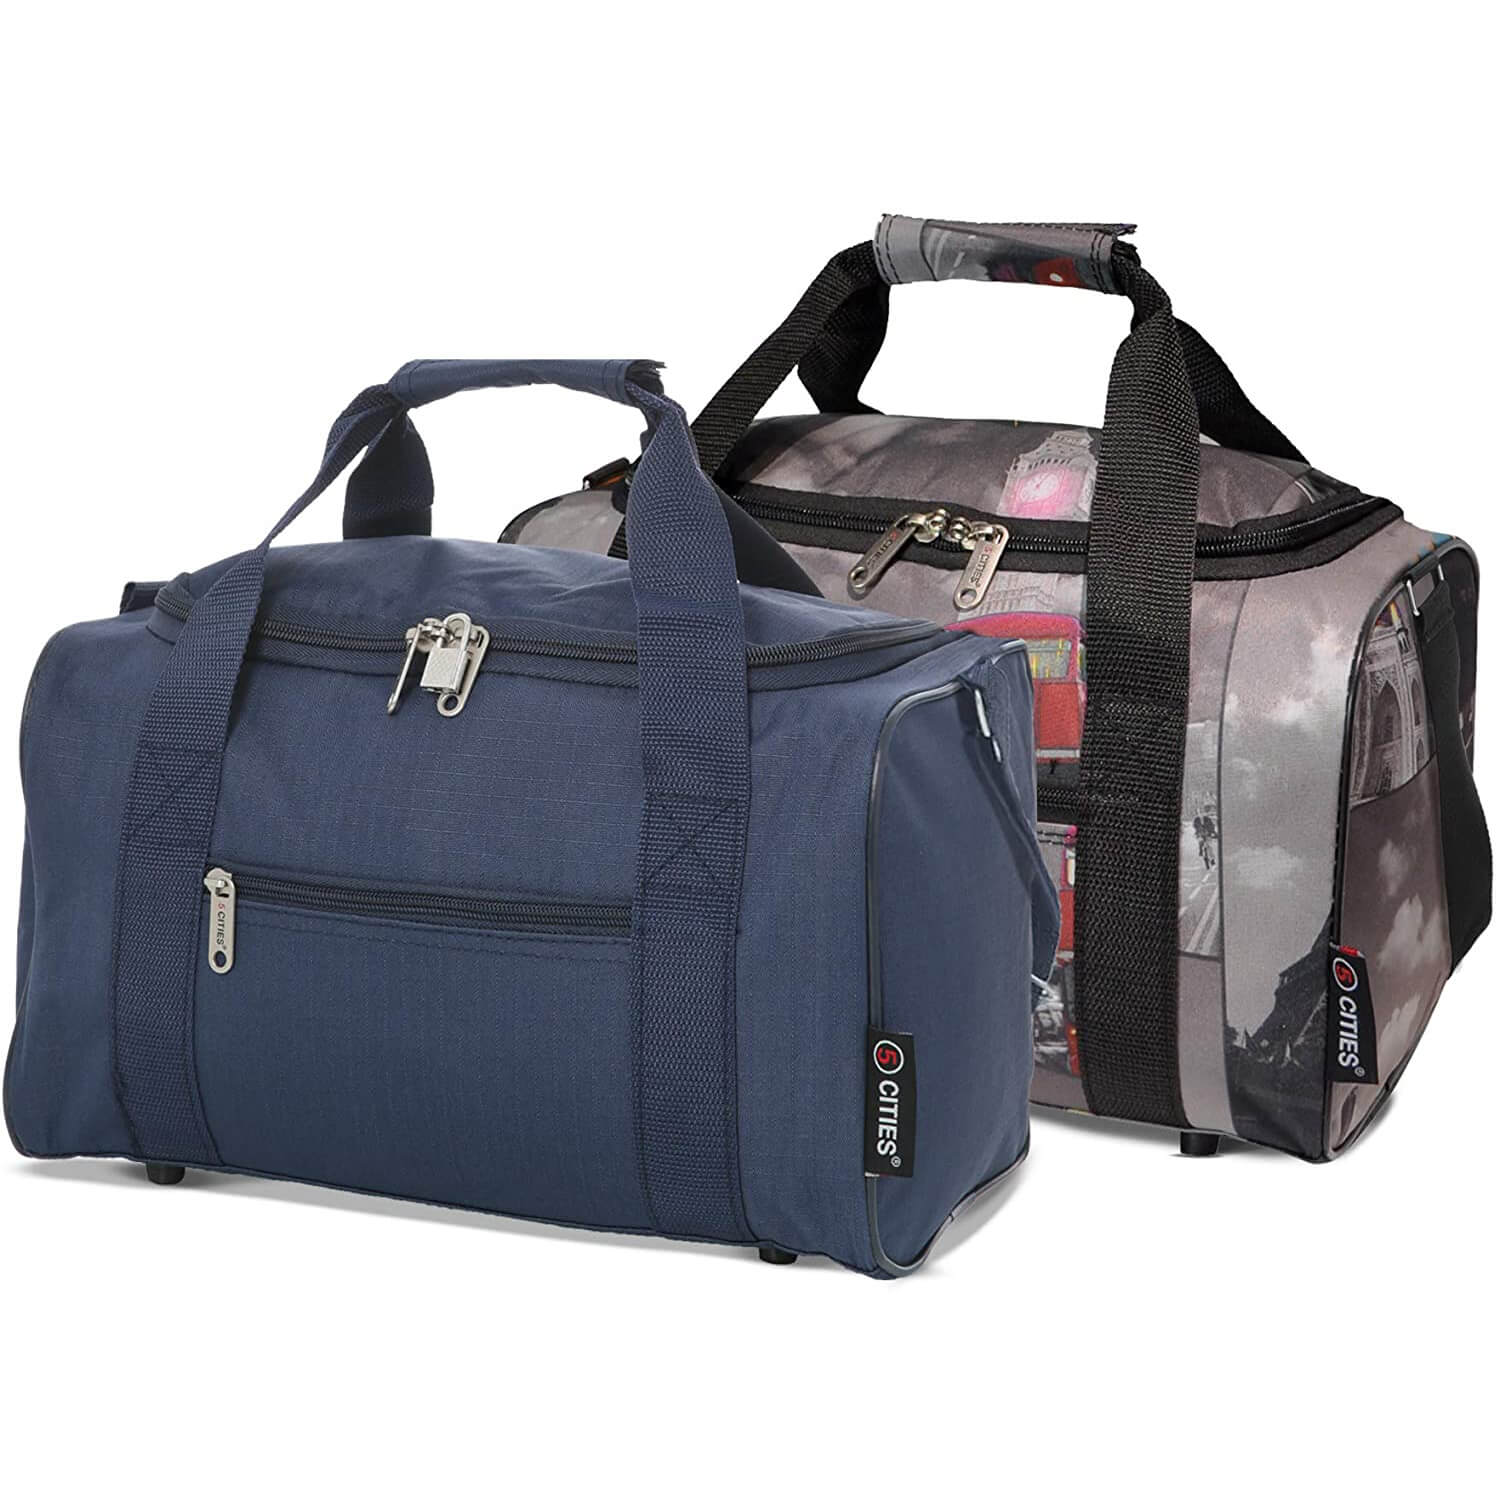 5 Cities (40x20x25cm) Hand Luggage Holdall Flight Bag, new and improved 2022 Ryanair Maximum Sized Under Seat Cabin Holdall Travel Flight Bag – Take the Max on Board, (x2 Set)